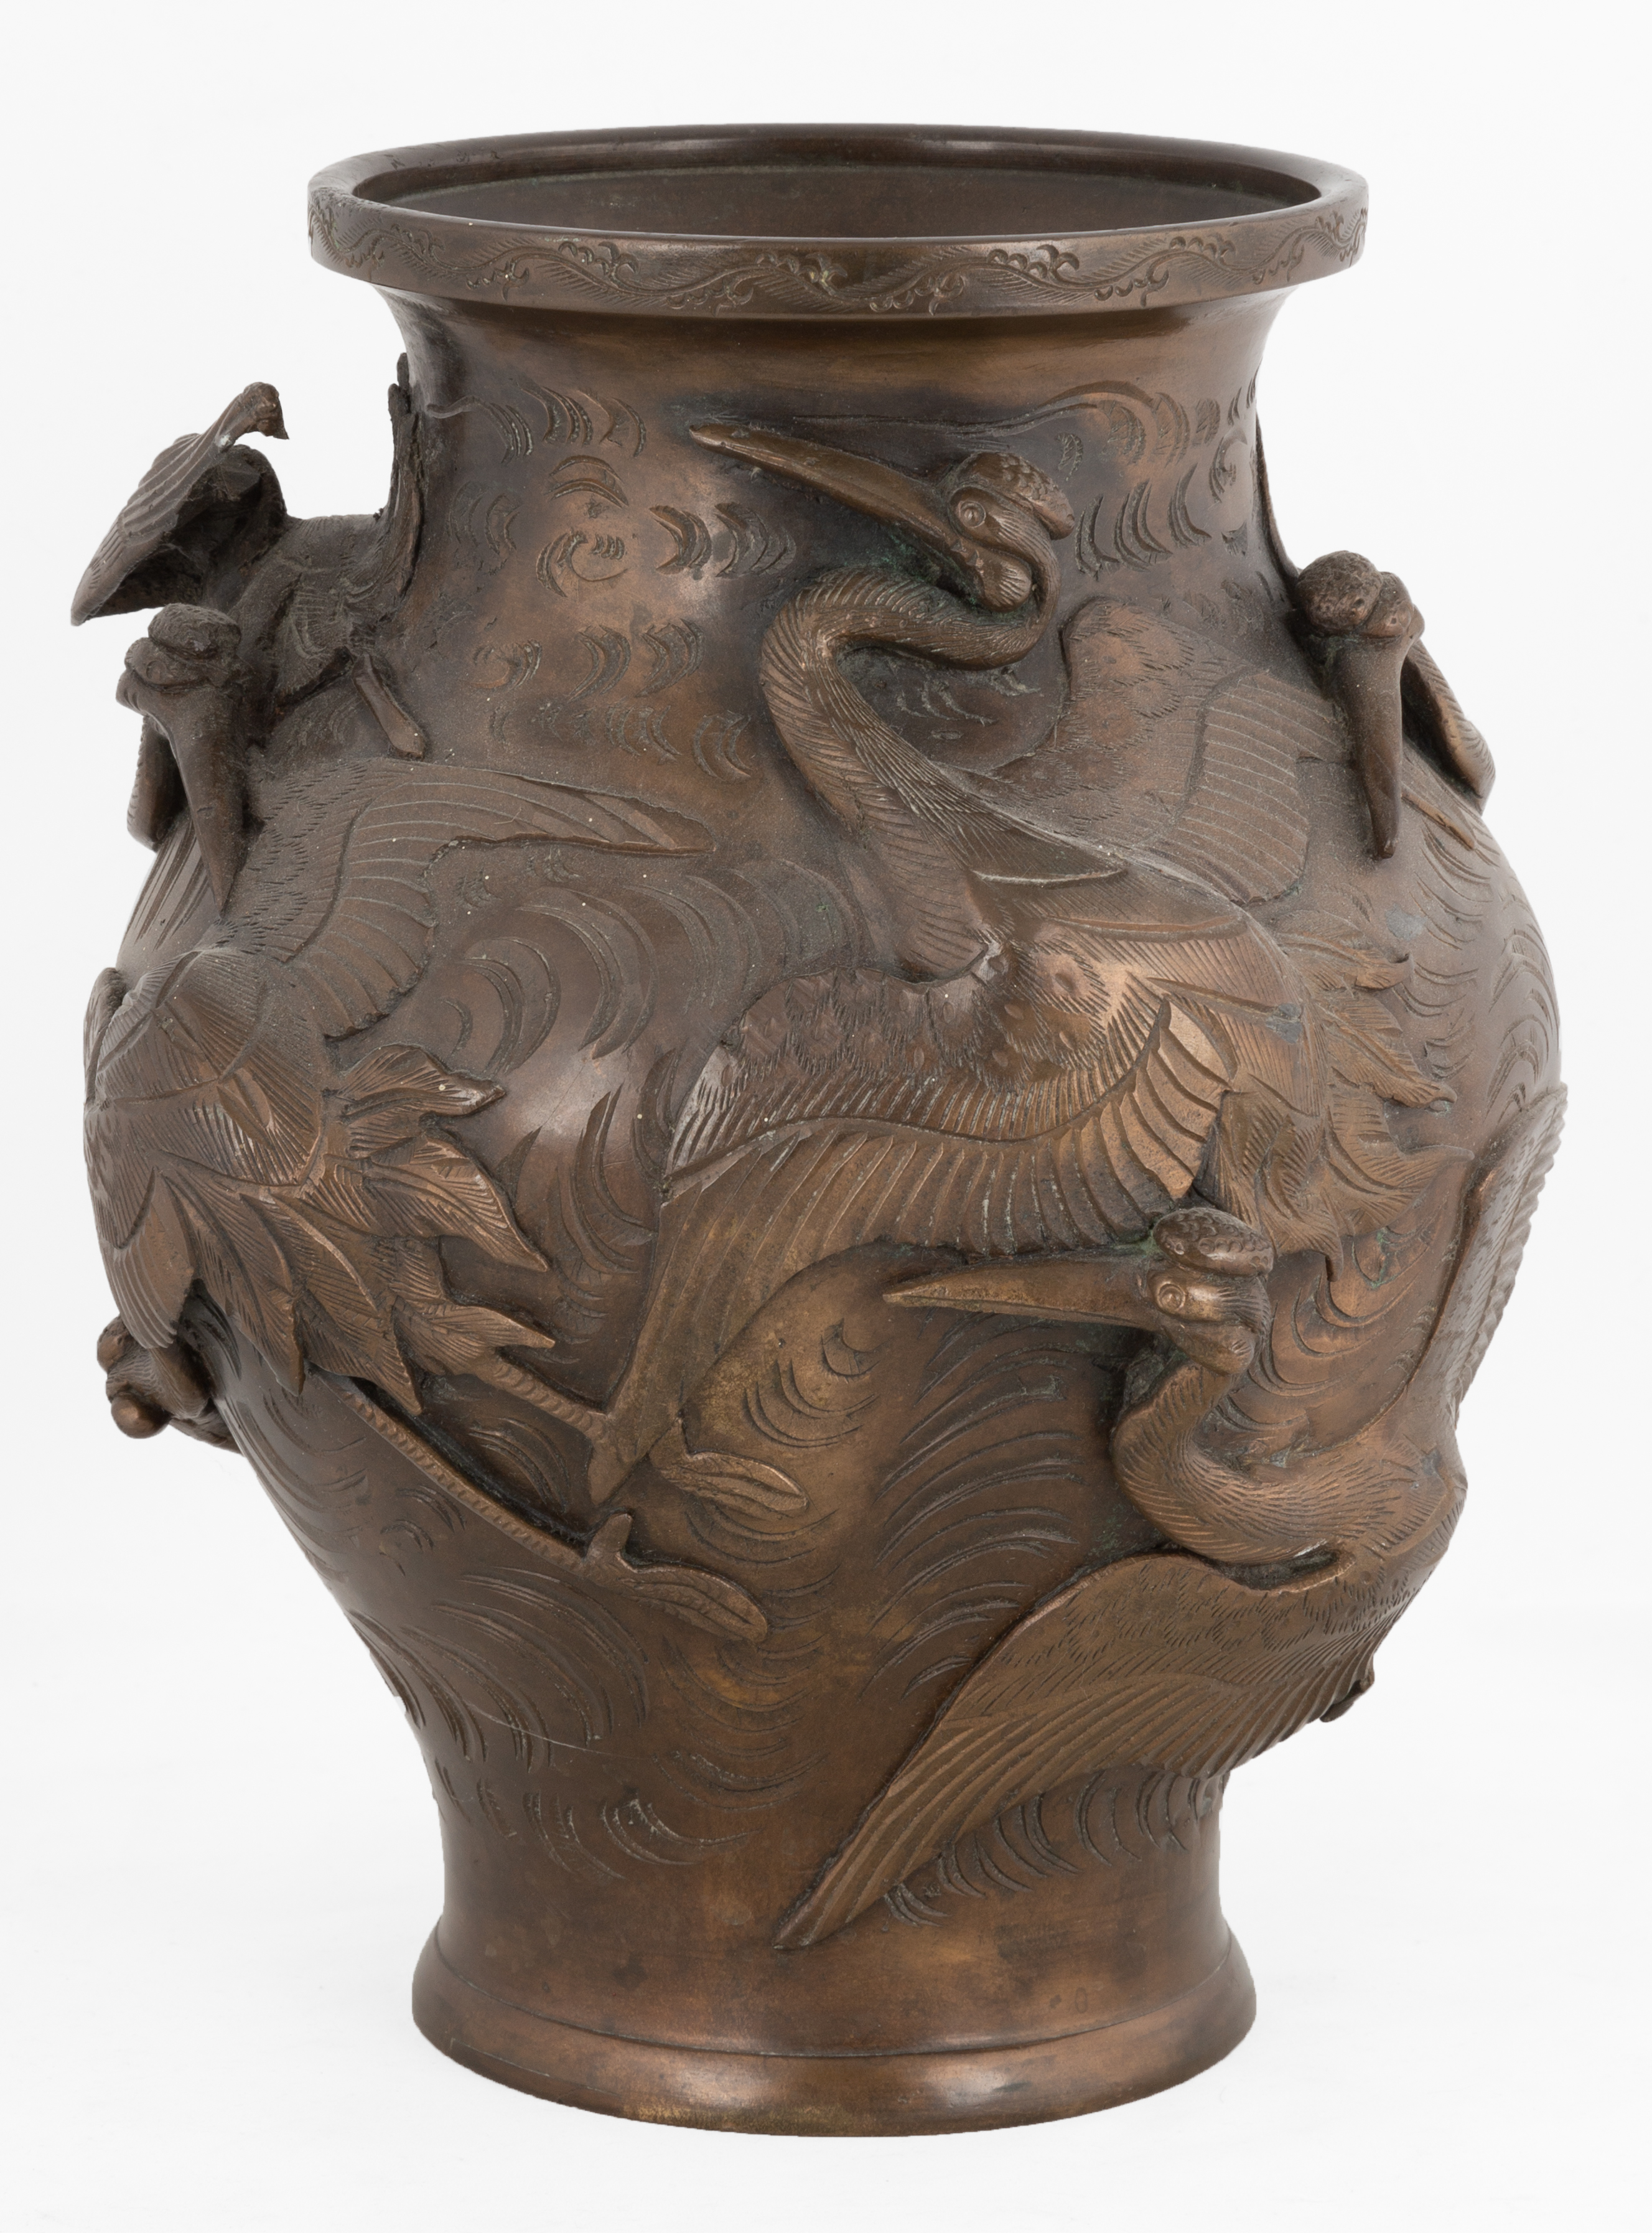 CHINESE BRONZE VASE Decorated with herons.